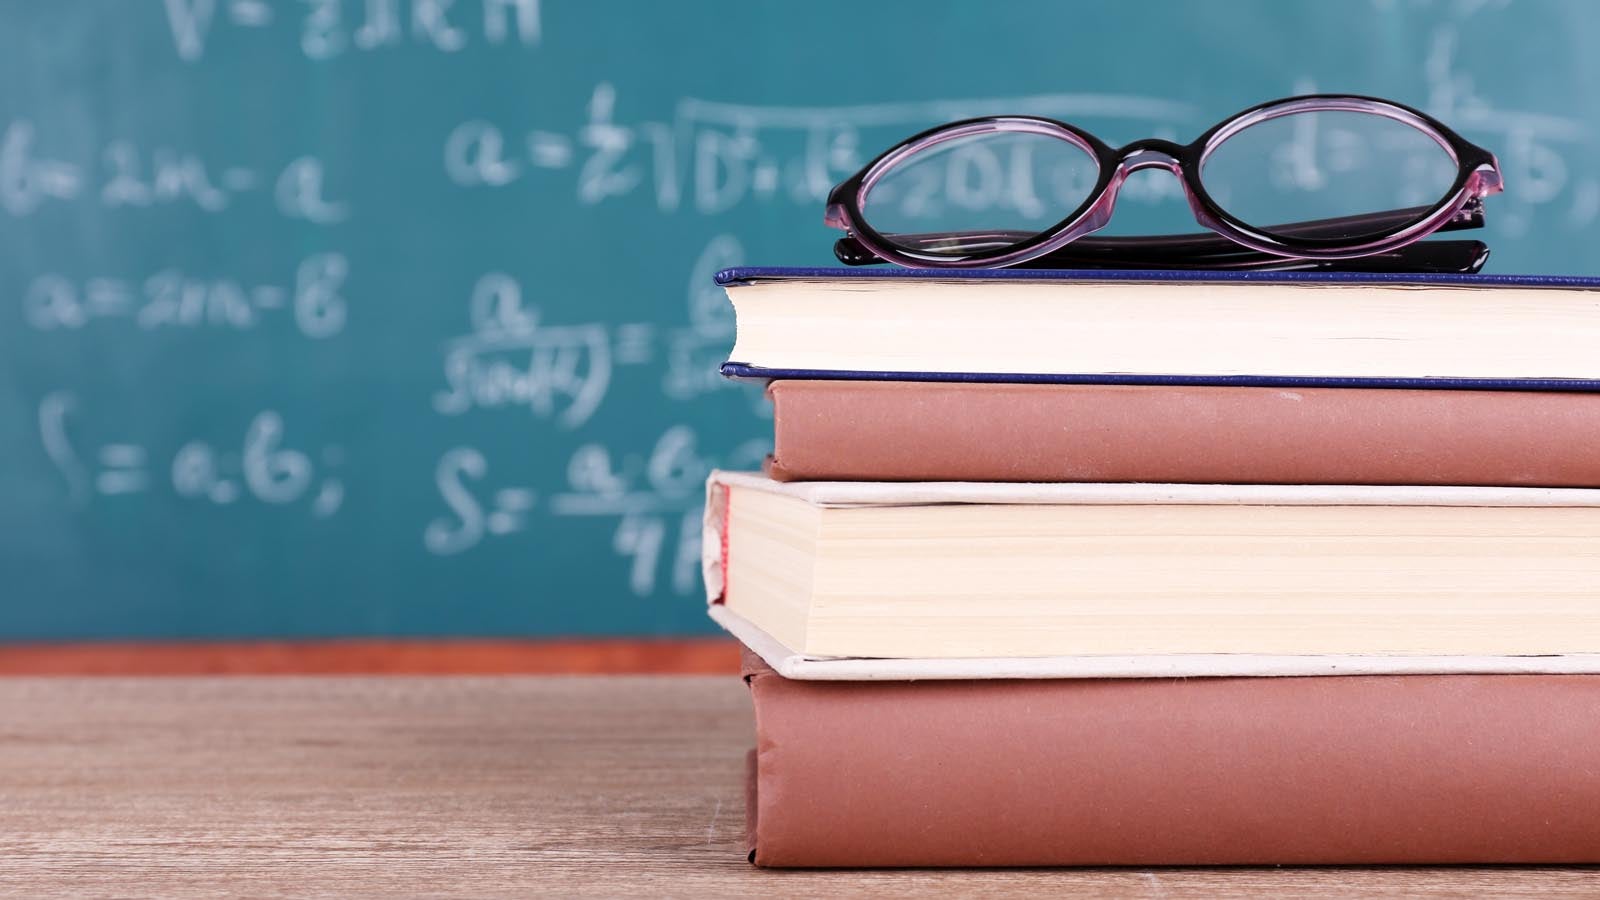 A pair of glasses on top of a stack of books, with a blurred chalkboard in the background